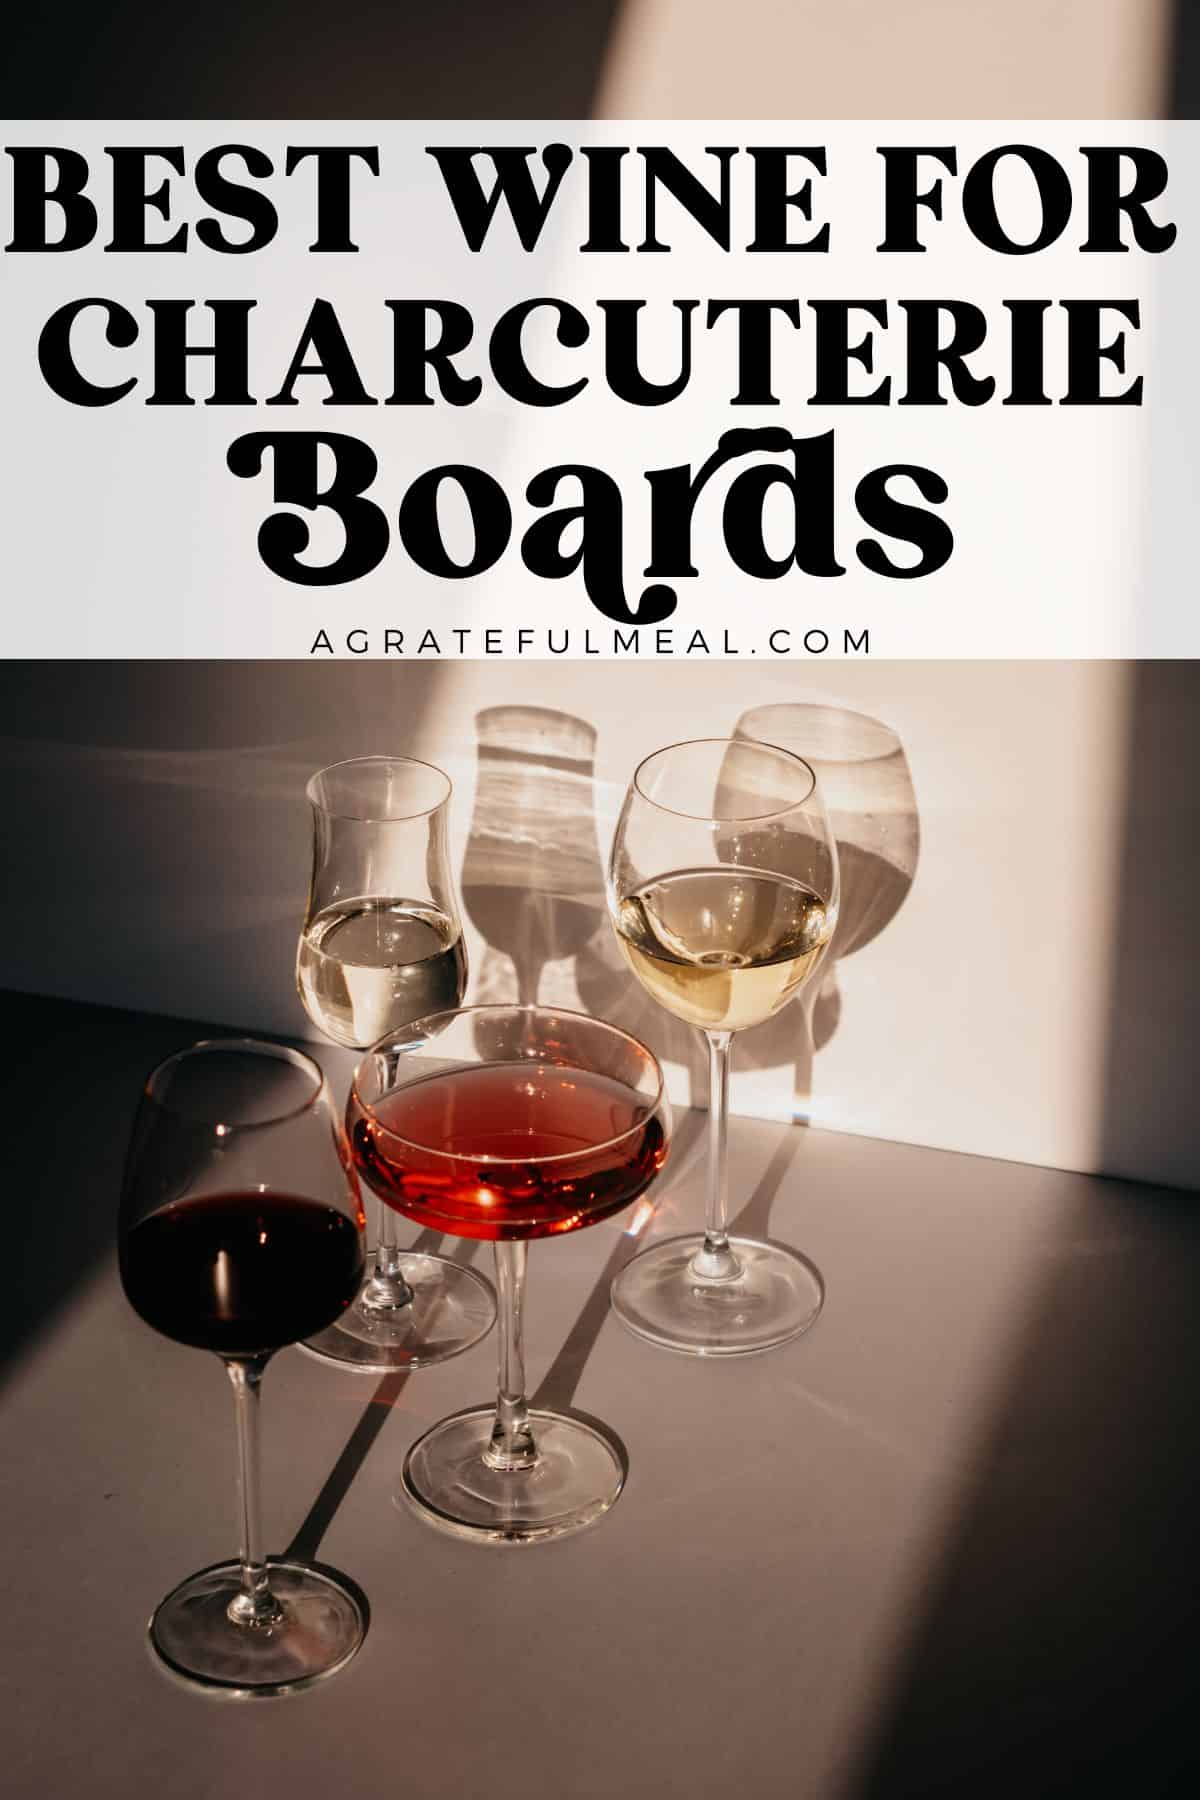 Text says "best wines for charcuterie boards, agratefulmeal.com" with several glasses of wine below.